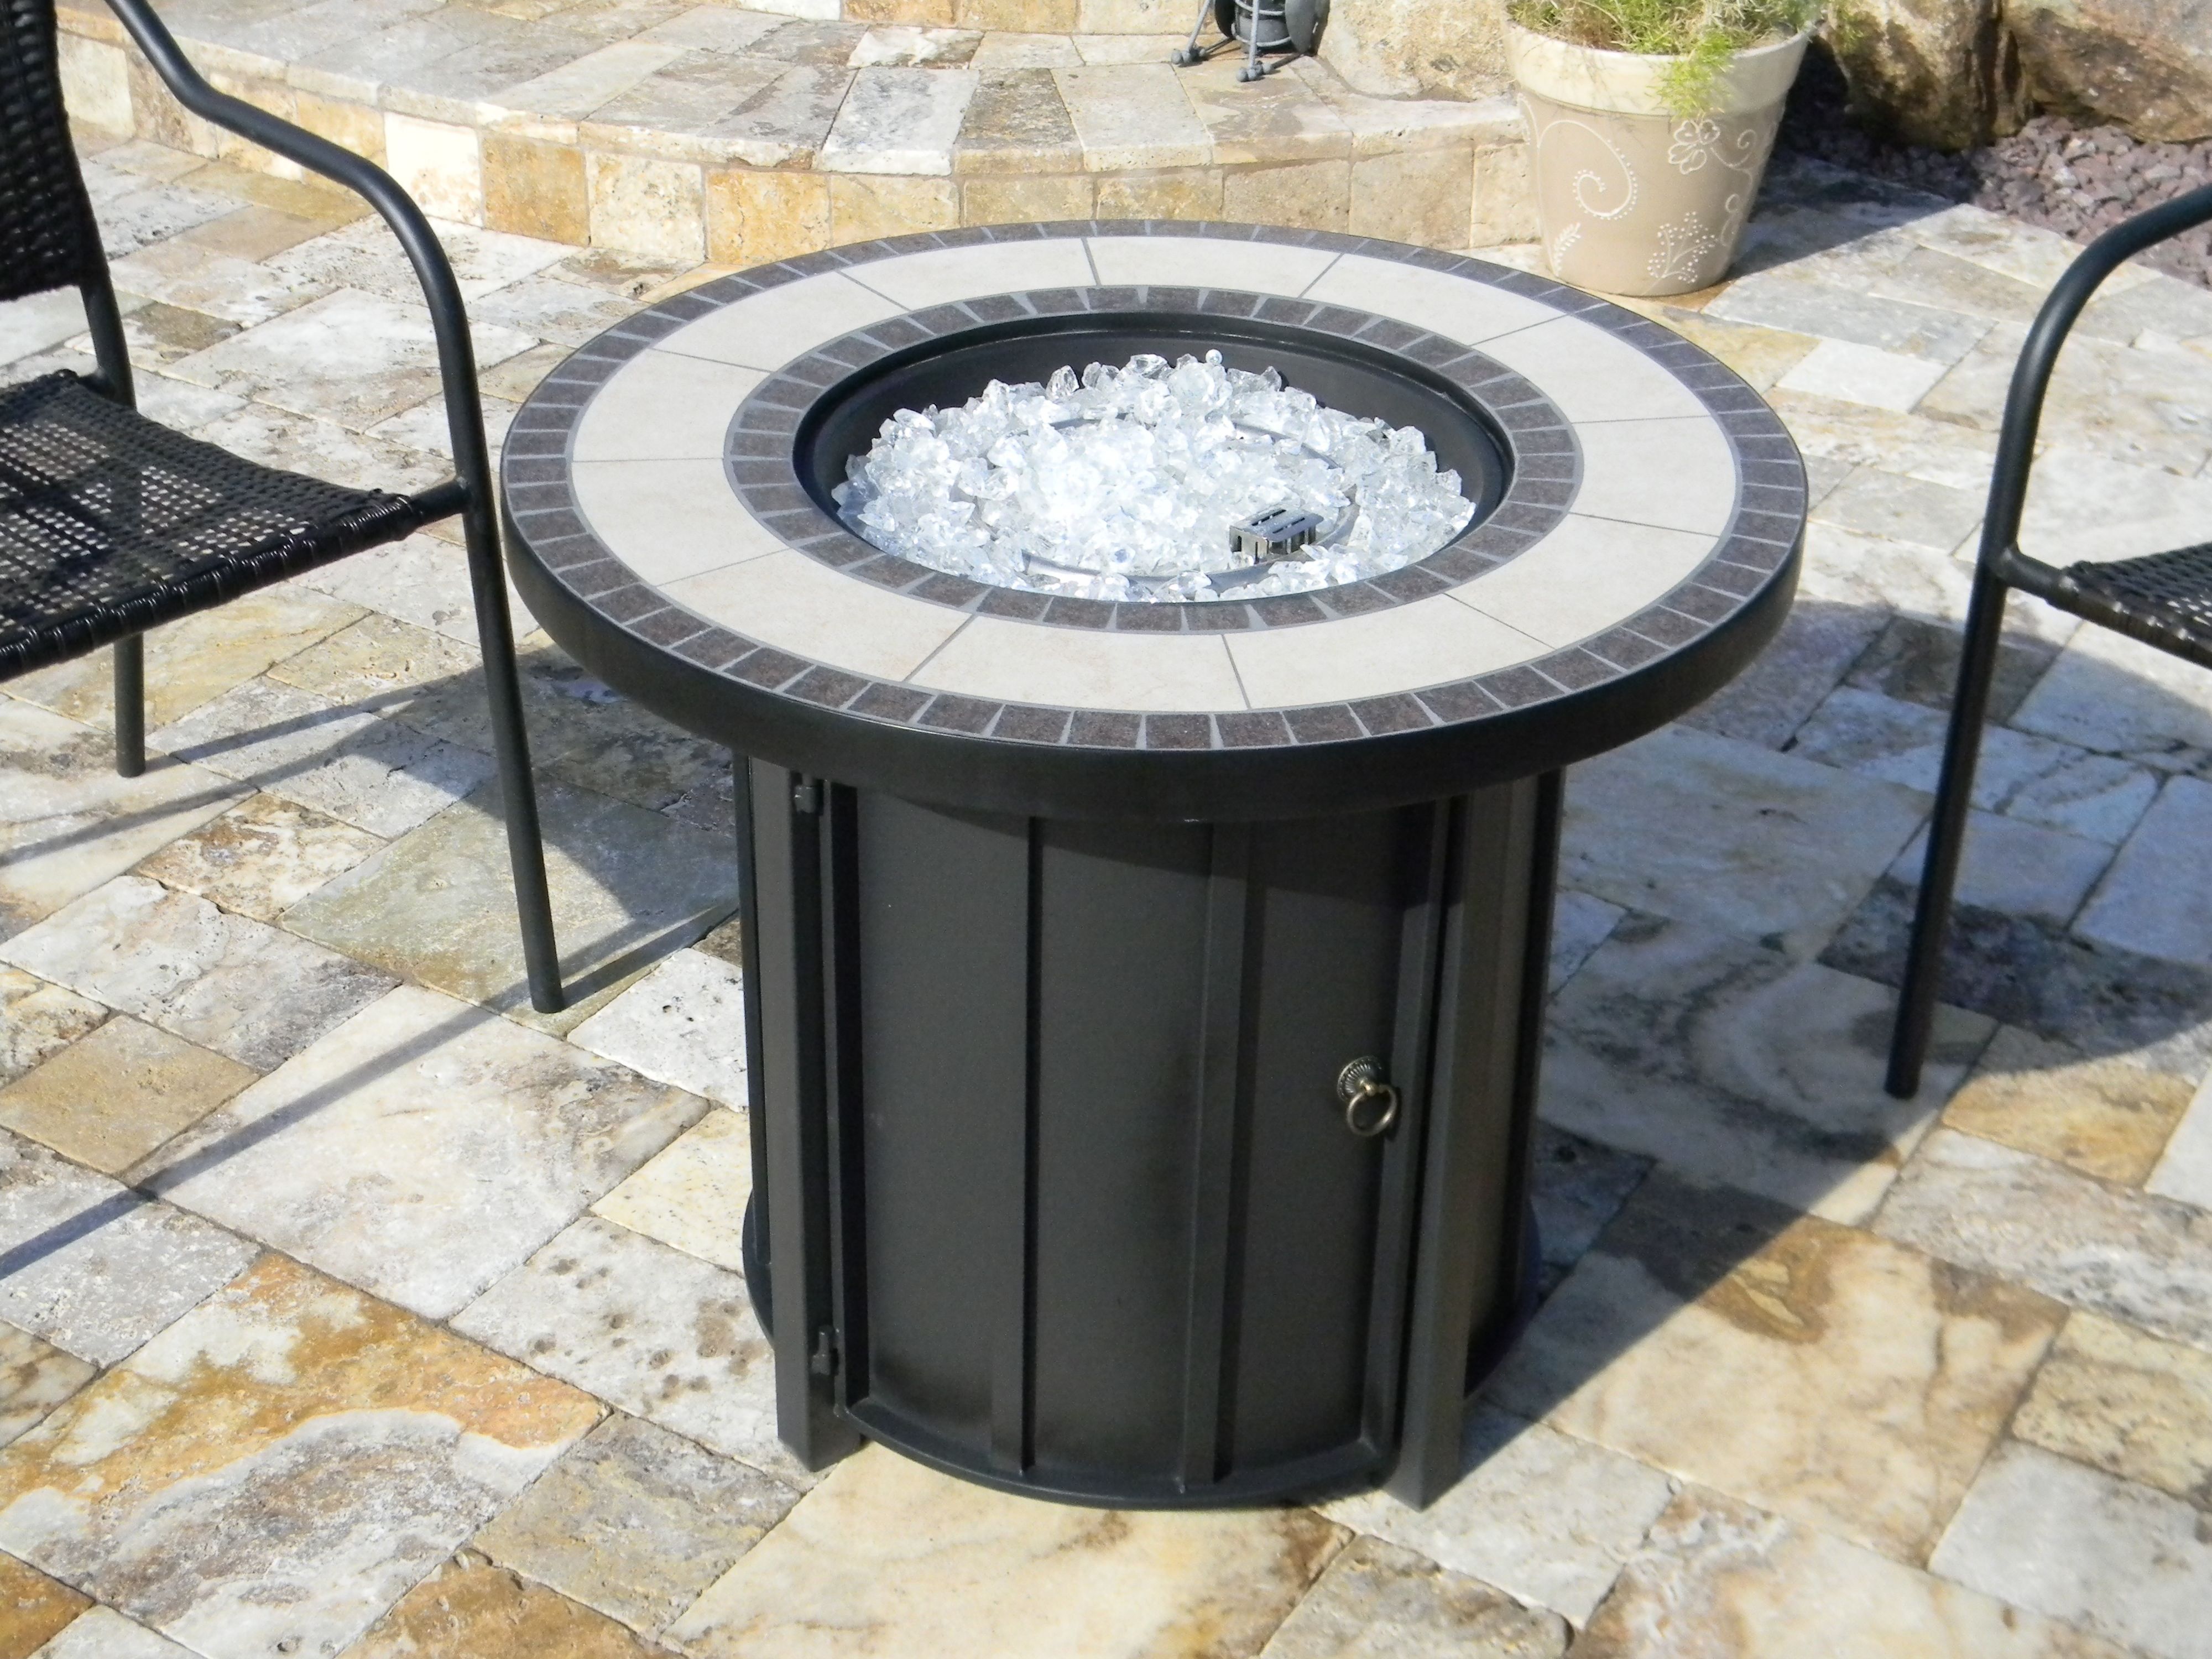 Hiland Round Propane Tile Top Fire Pit, Round Granite Top Fire Pit